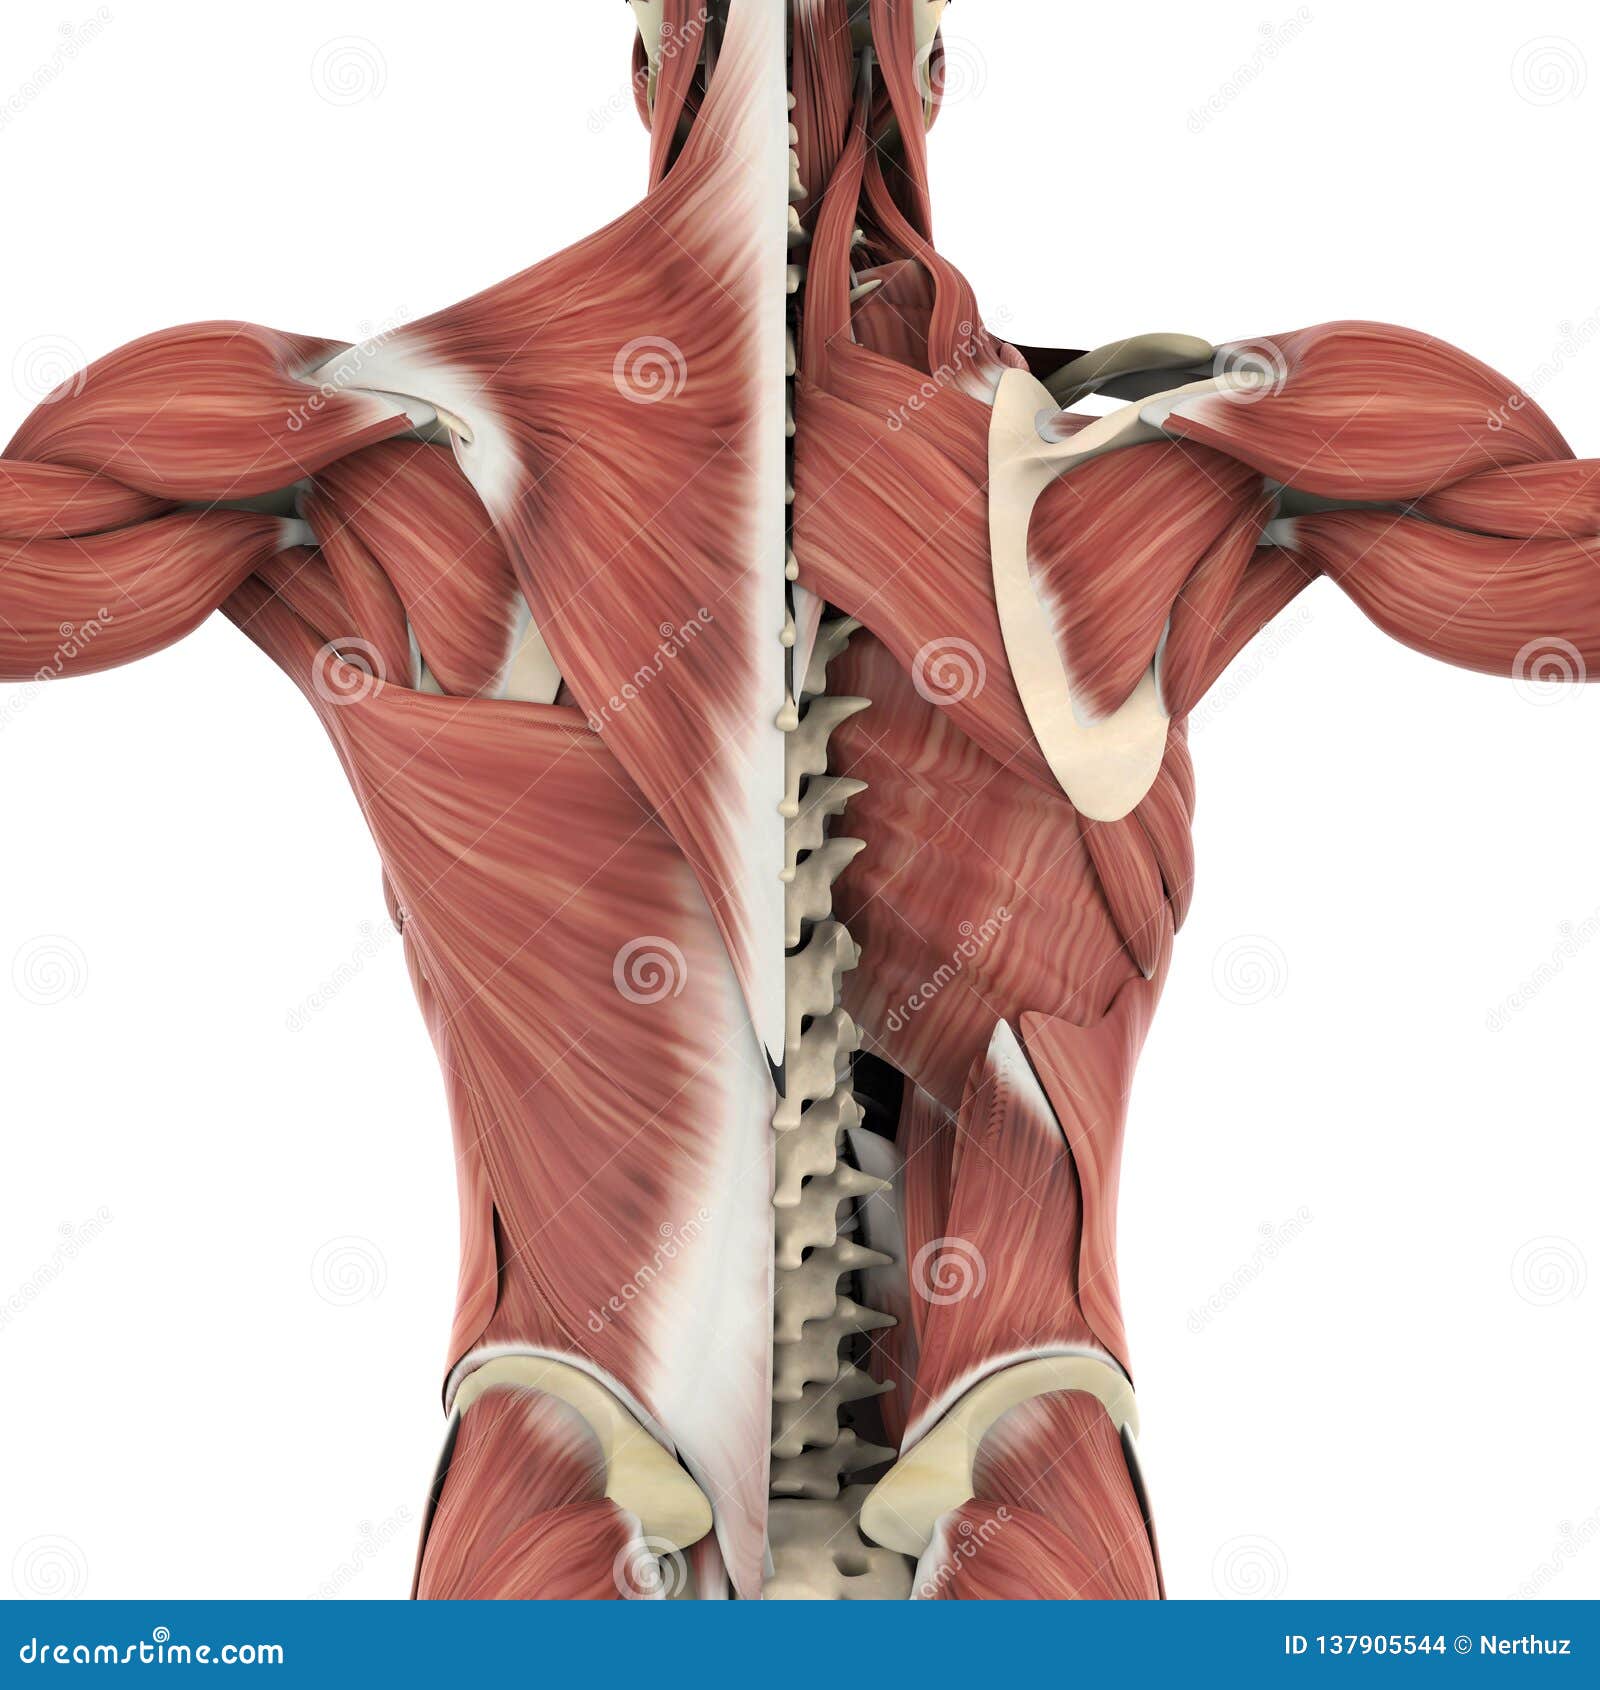 Back Muscles Anatomy / Deep Muscles Of The Back Attachments Innervation And Functions Preview Human Anatomy Kenhub Youtube - This is my video about the muscles of the back.